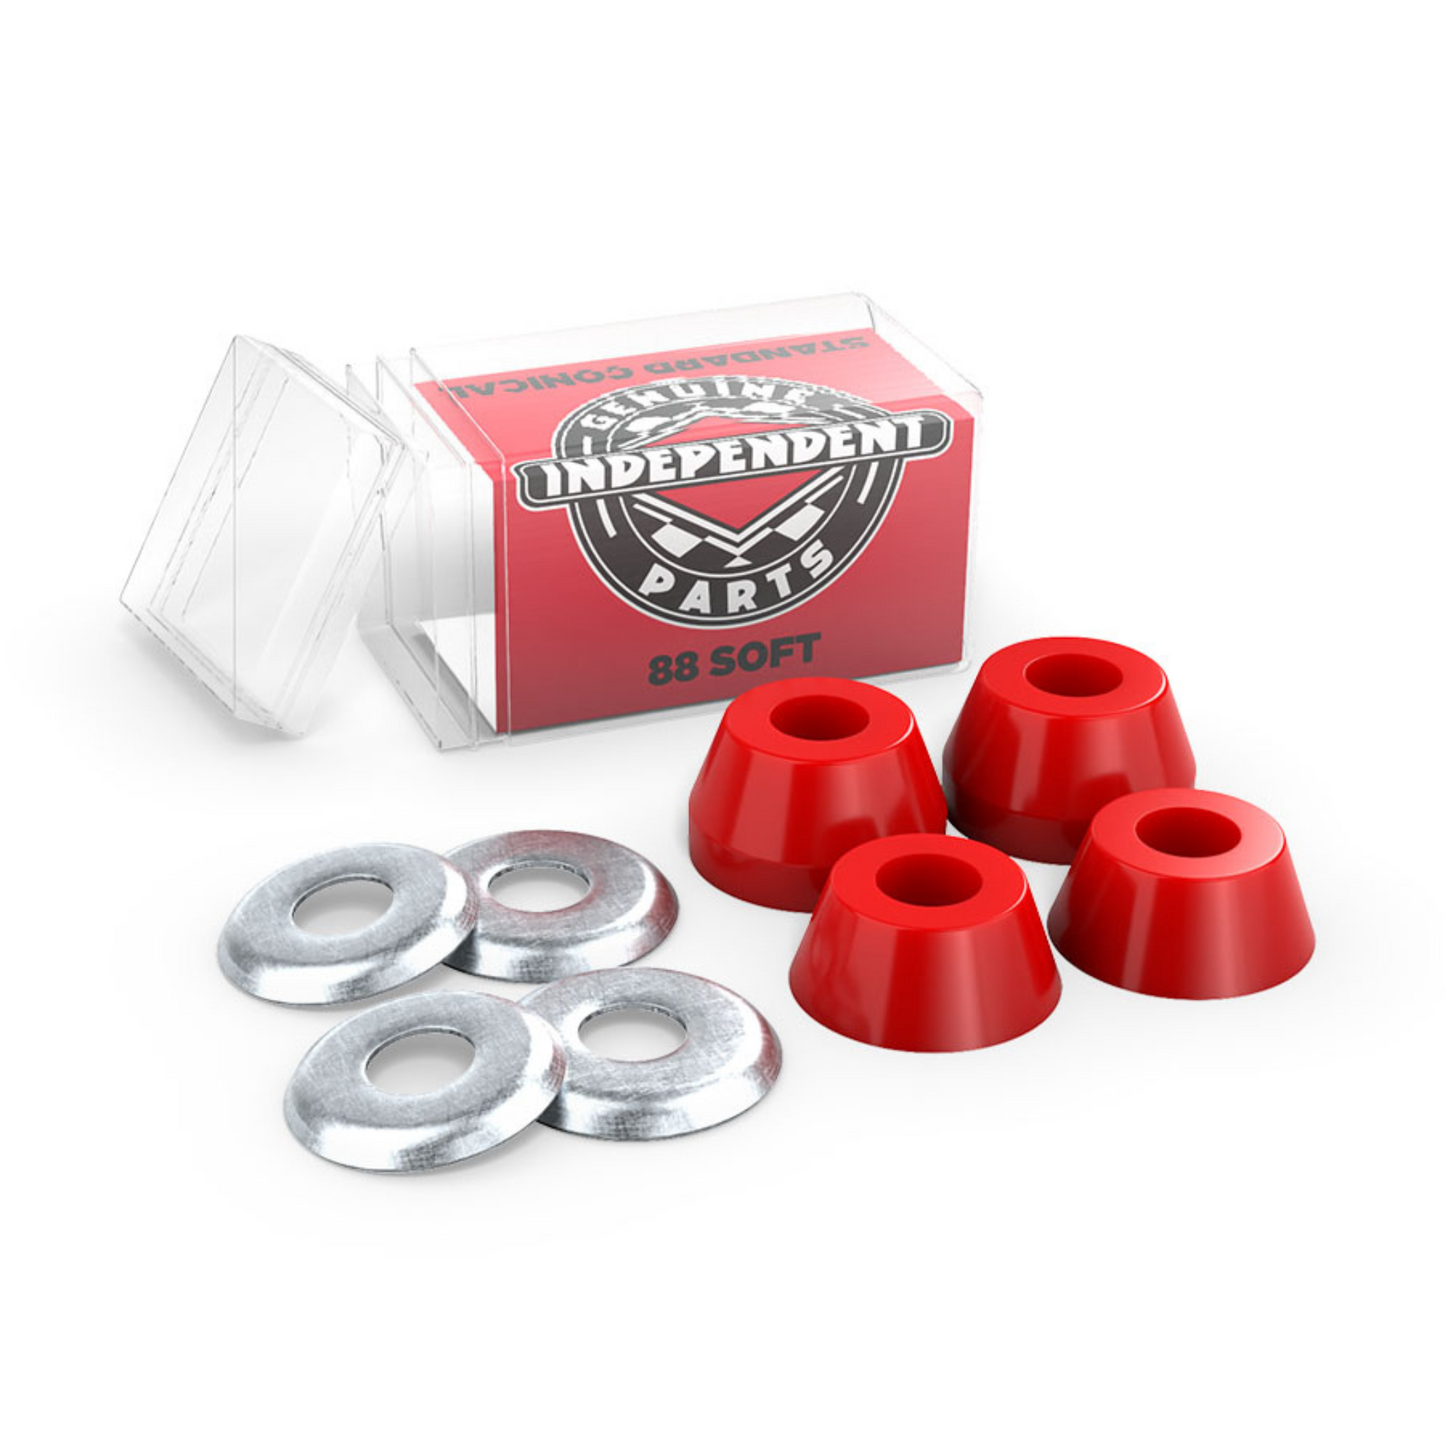 Independent Bushings - Conical Soft